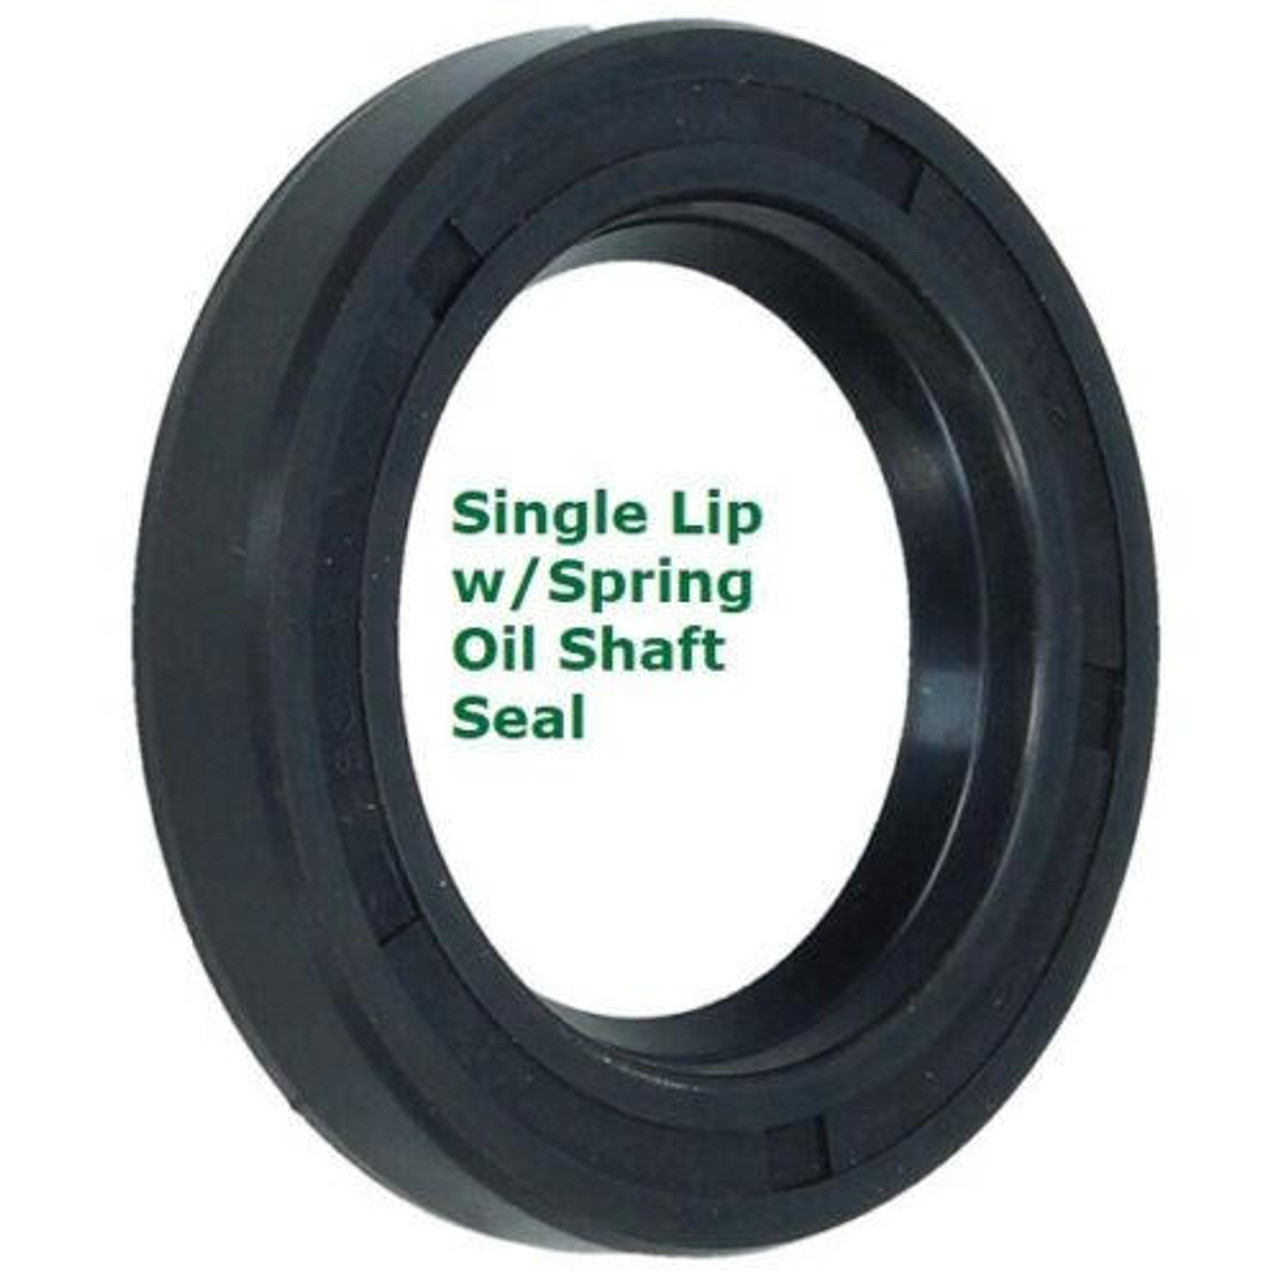 Metric Oil Shaft Seal 135 x 170 x 12mm   Price for 1 pc